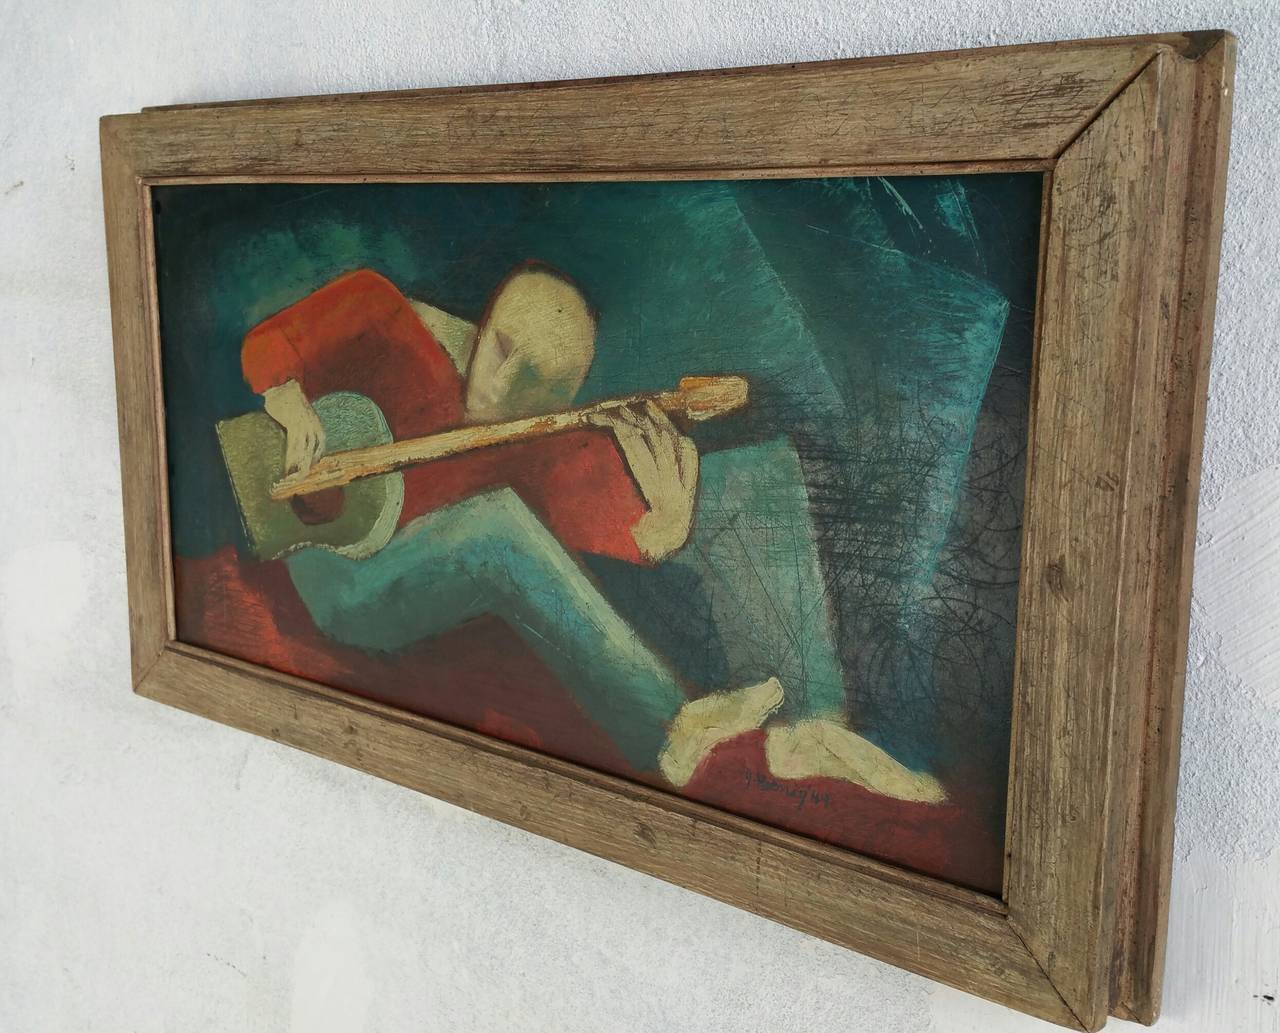 Great little painting..'Guitar Player' WPA inspired,, Executed by James Koenig, c. 1949. Retains original hand made frame,, Buffalo New York artist,, Gallery numbers on back showing it was exhibited at  Albright Knox Art Gallery.